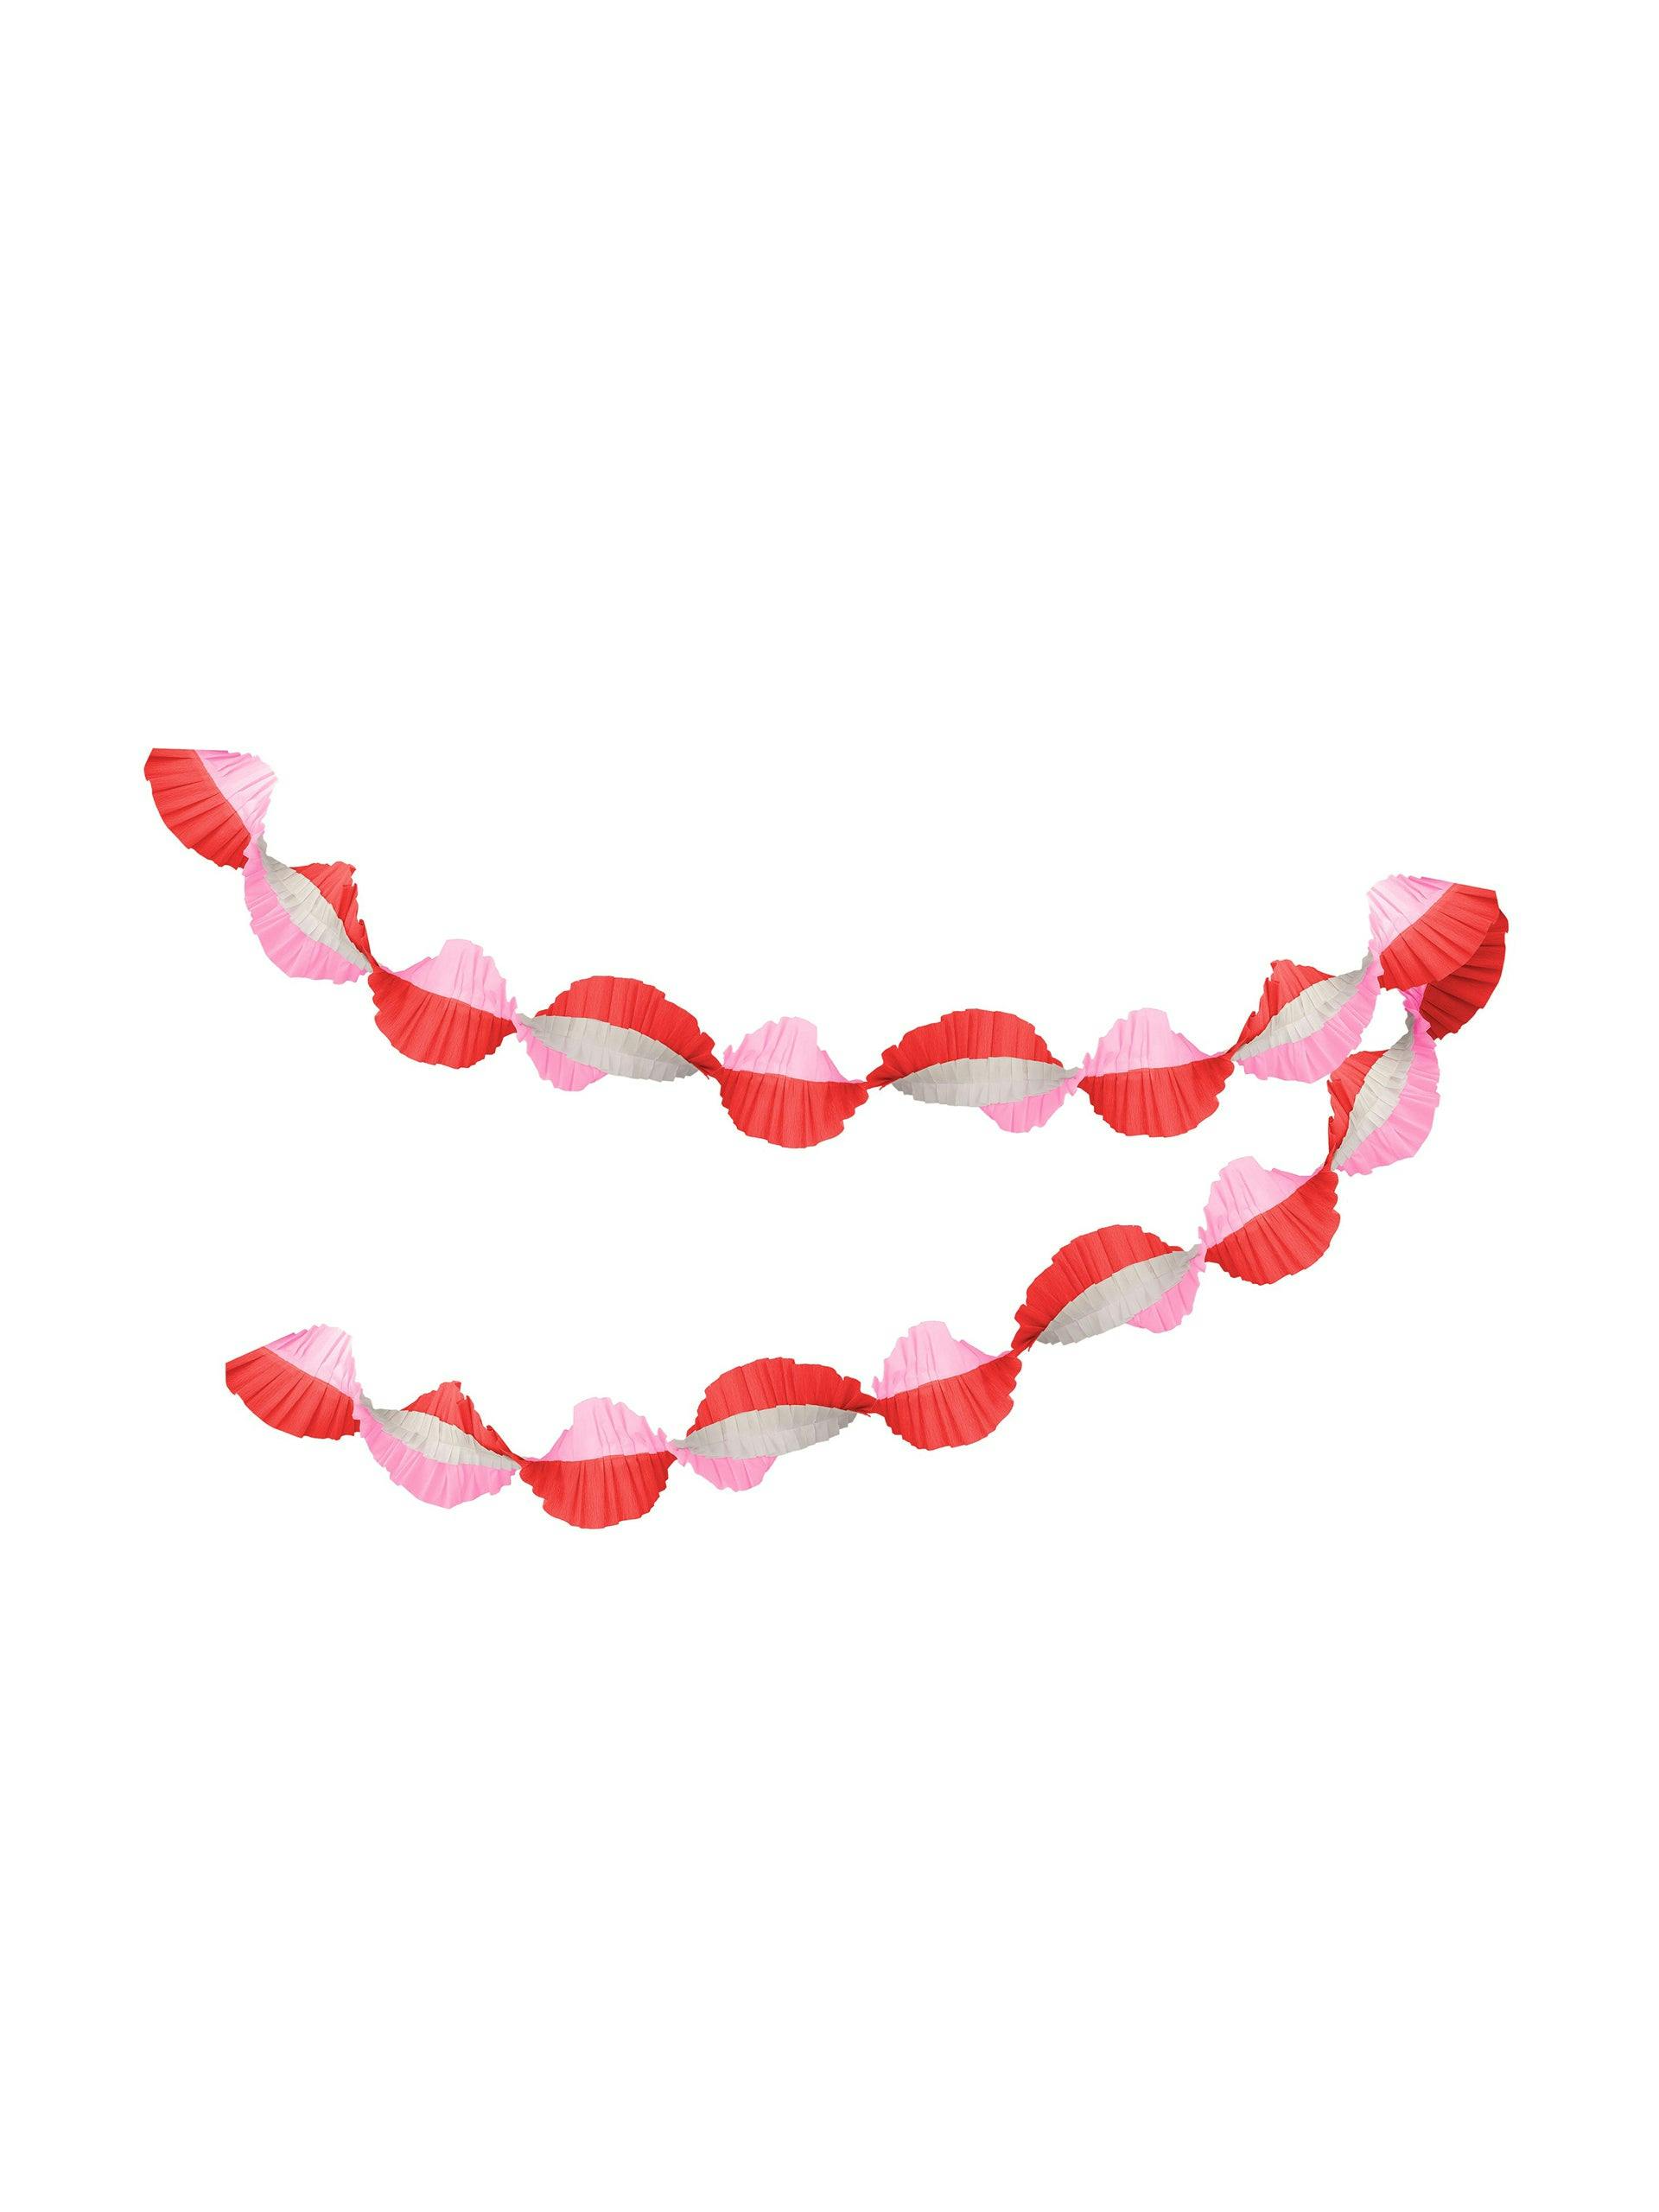 Pink & red stitched streamer